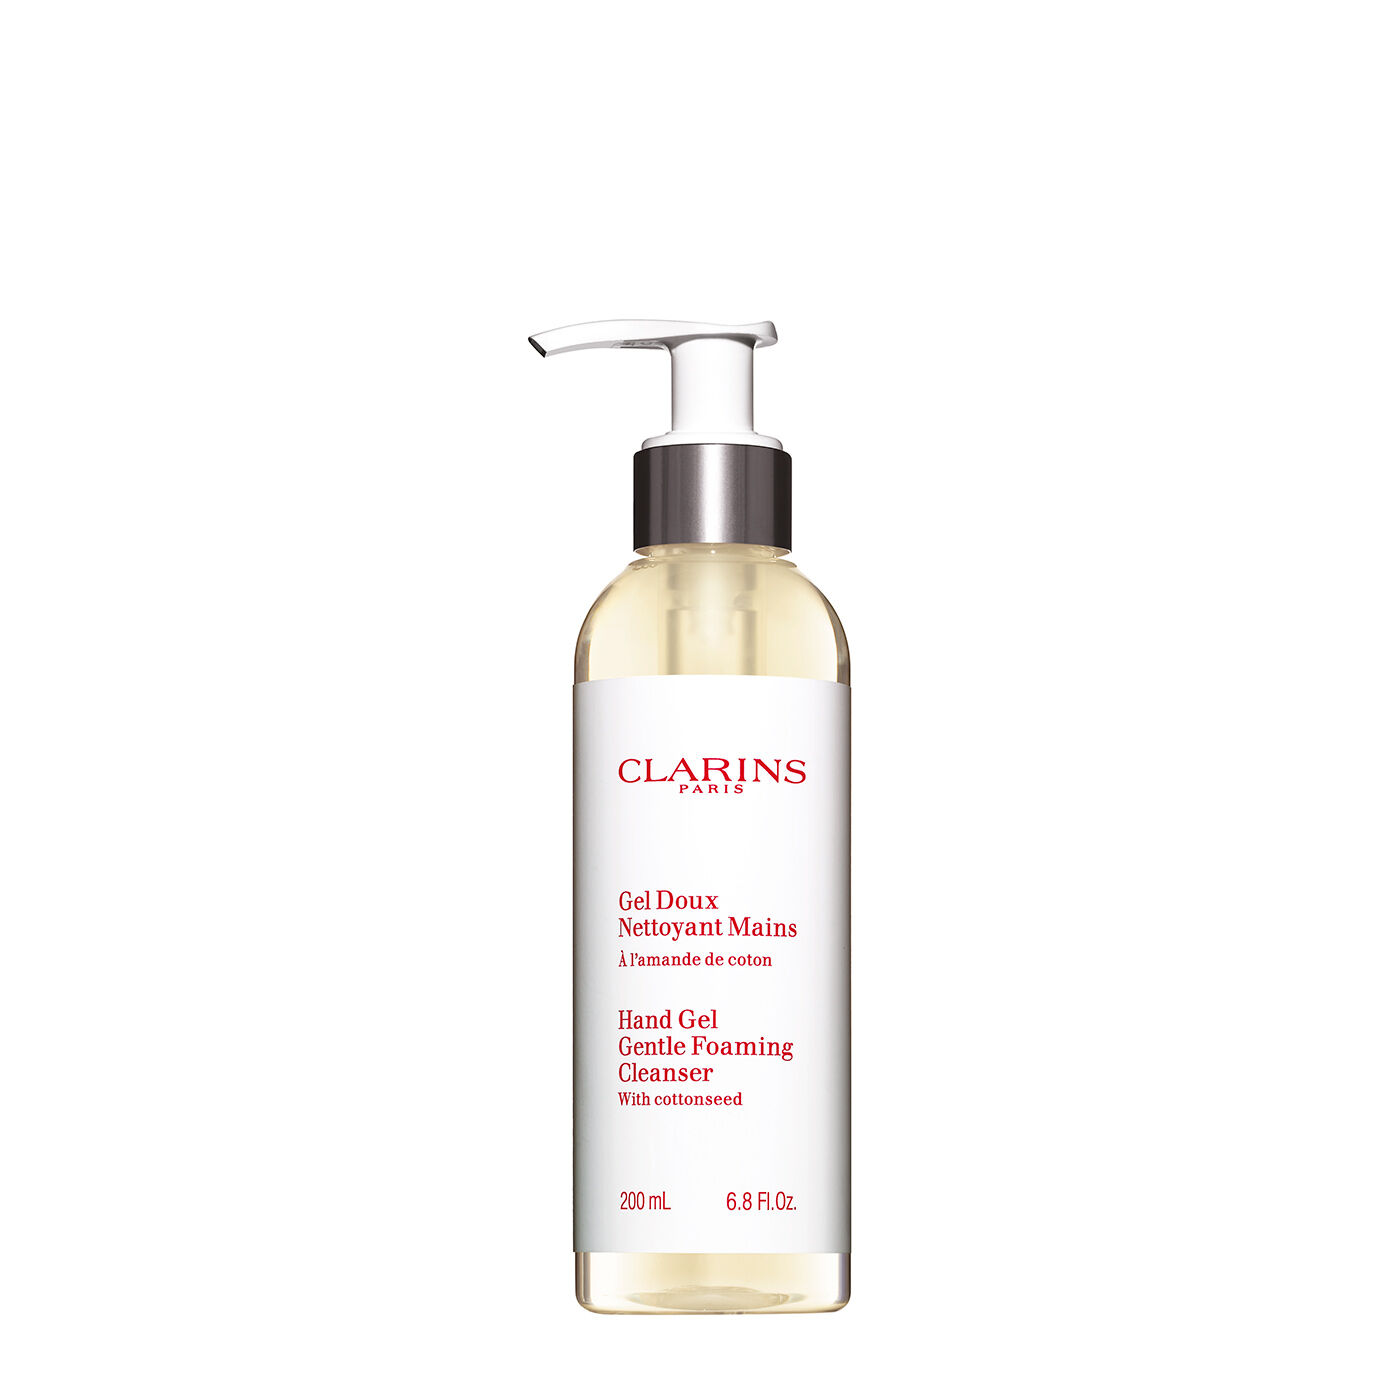 Shop Clarins Hand Gel Gentle Foaming Cleanser - With Cottonseed